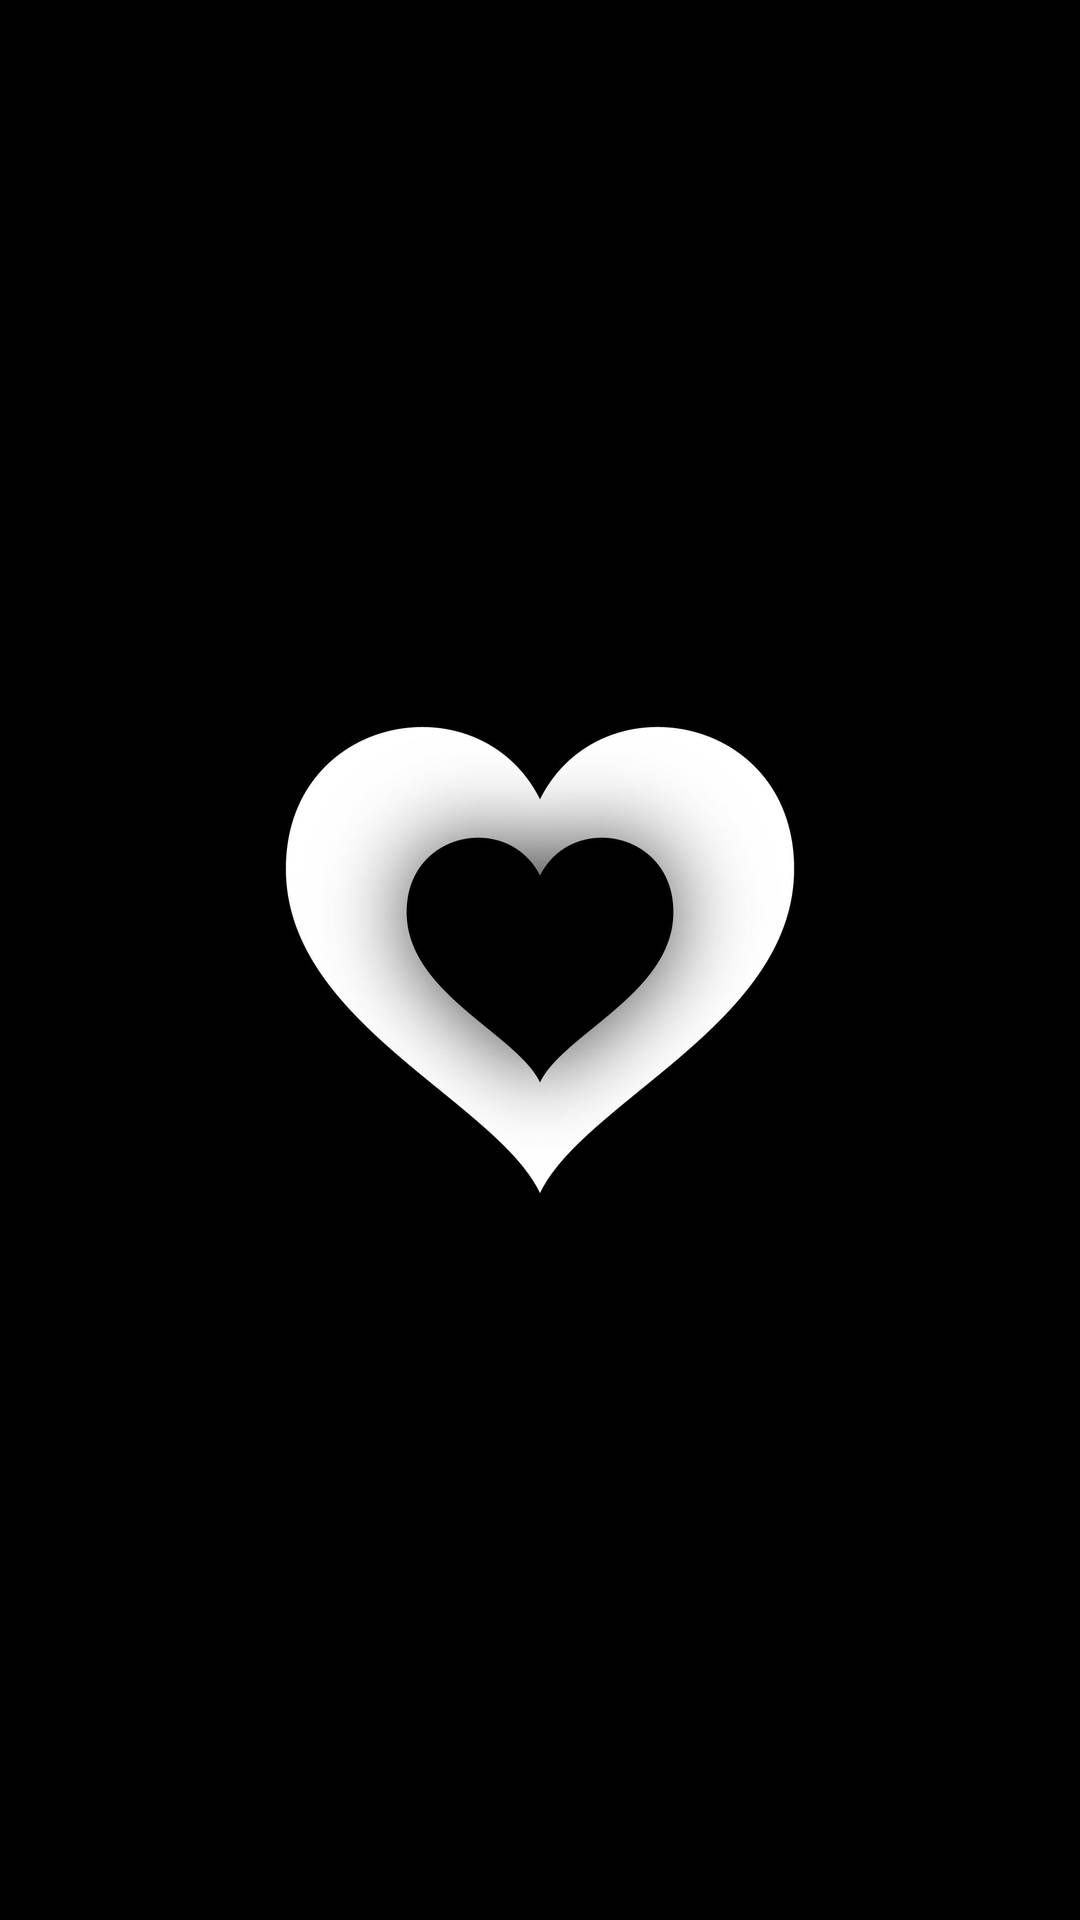 A black and white heart on the wall - Black heart